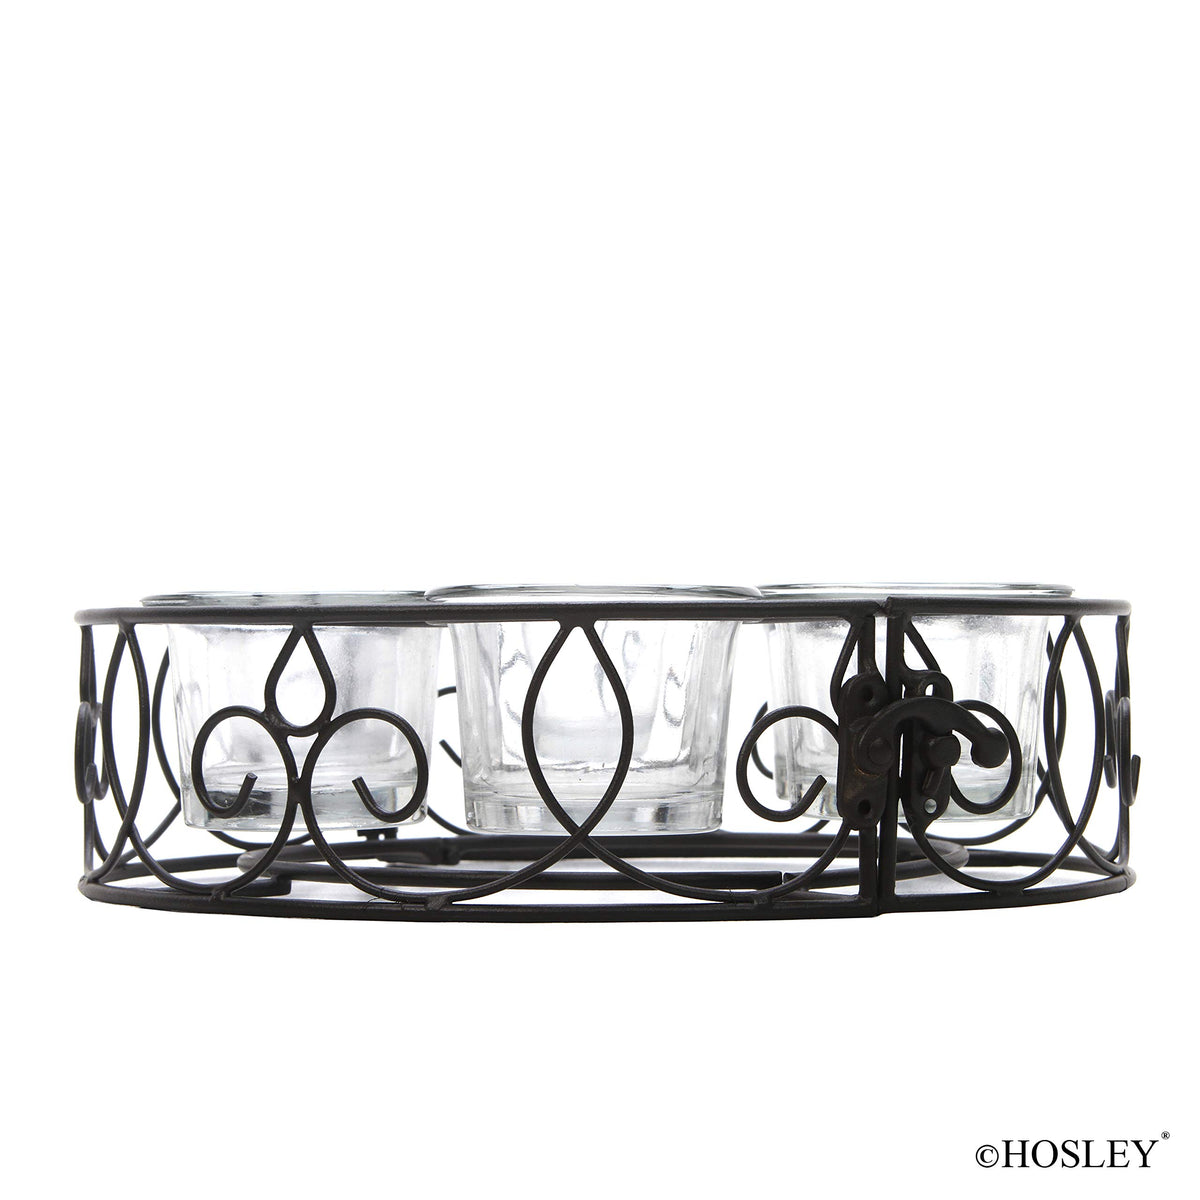 HOSLEY®  Outdoor Umbrella Pole Votive Candle Holder With 6 Glass Candle Holders, 8 inches Diameter